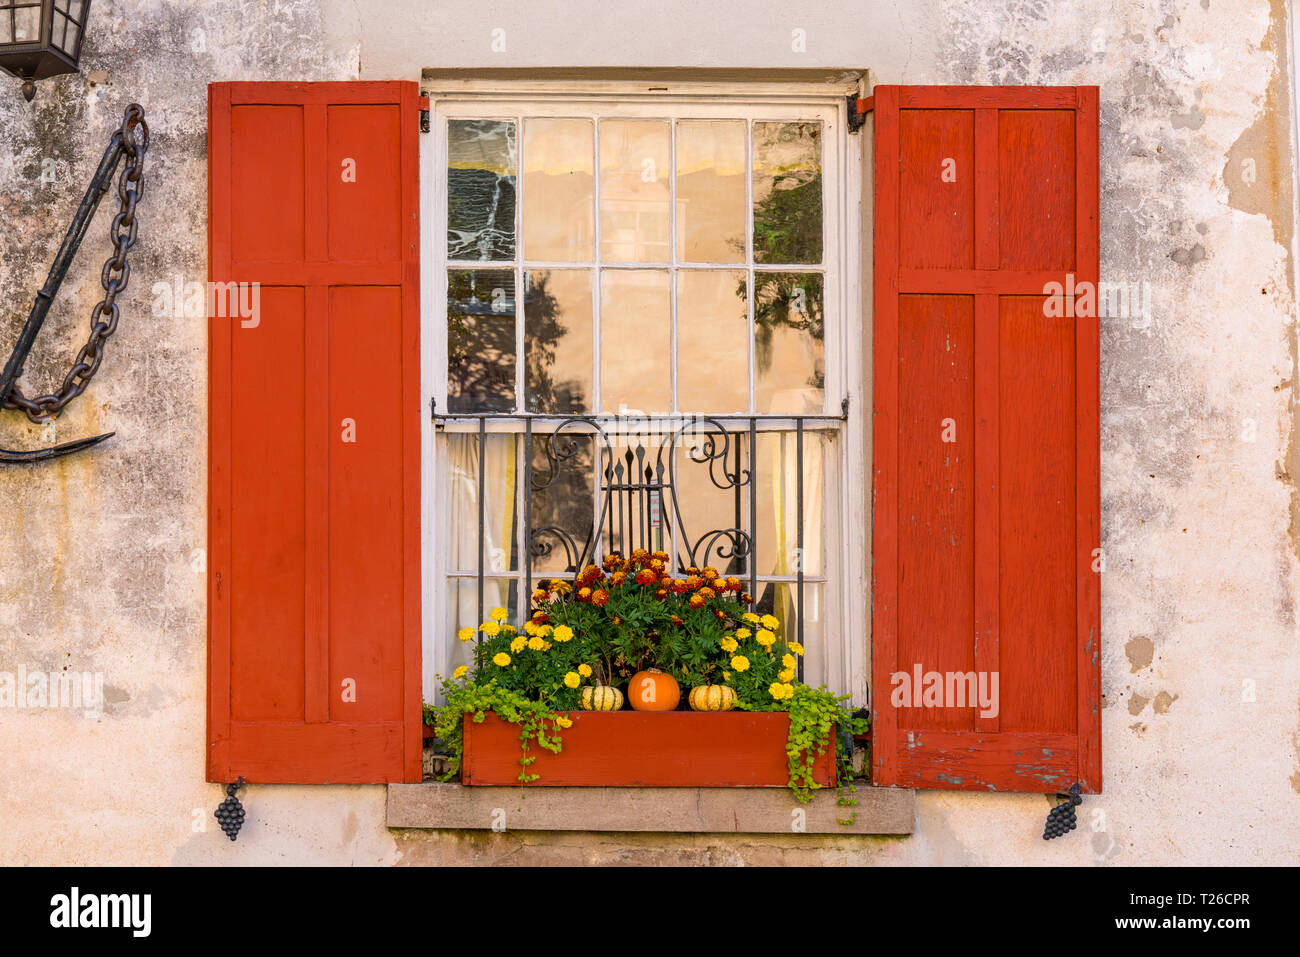 Exterior window of historic colonial home with flower box and red shutters Stock Photo